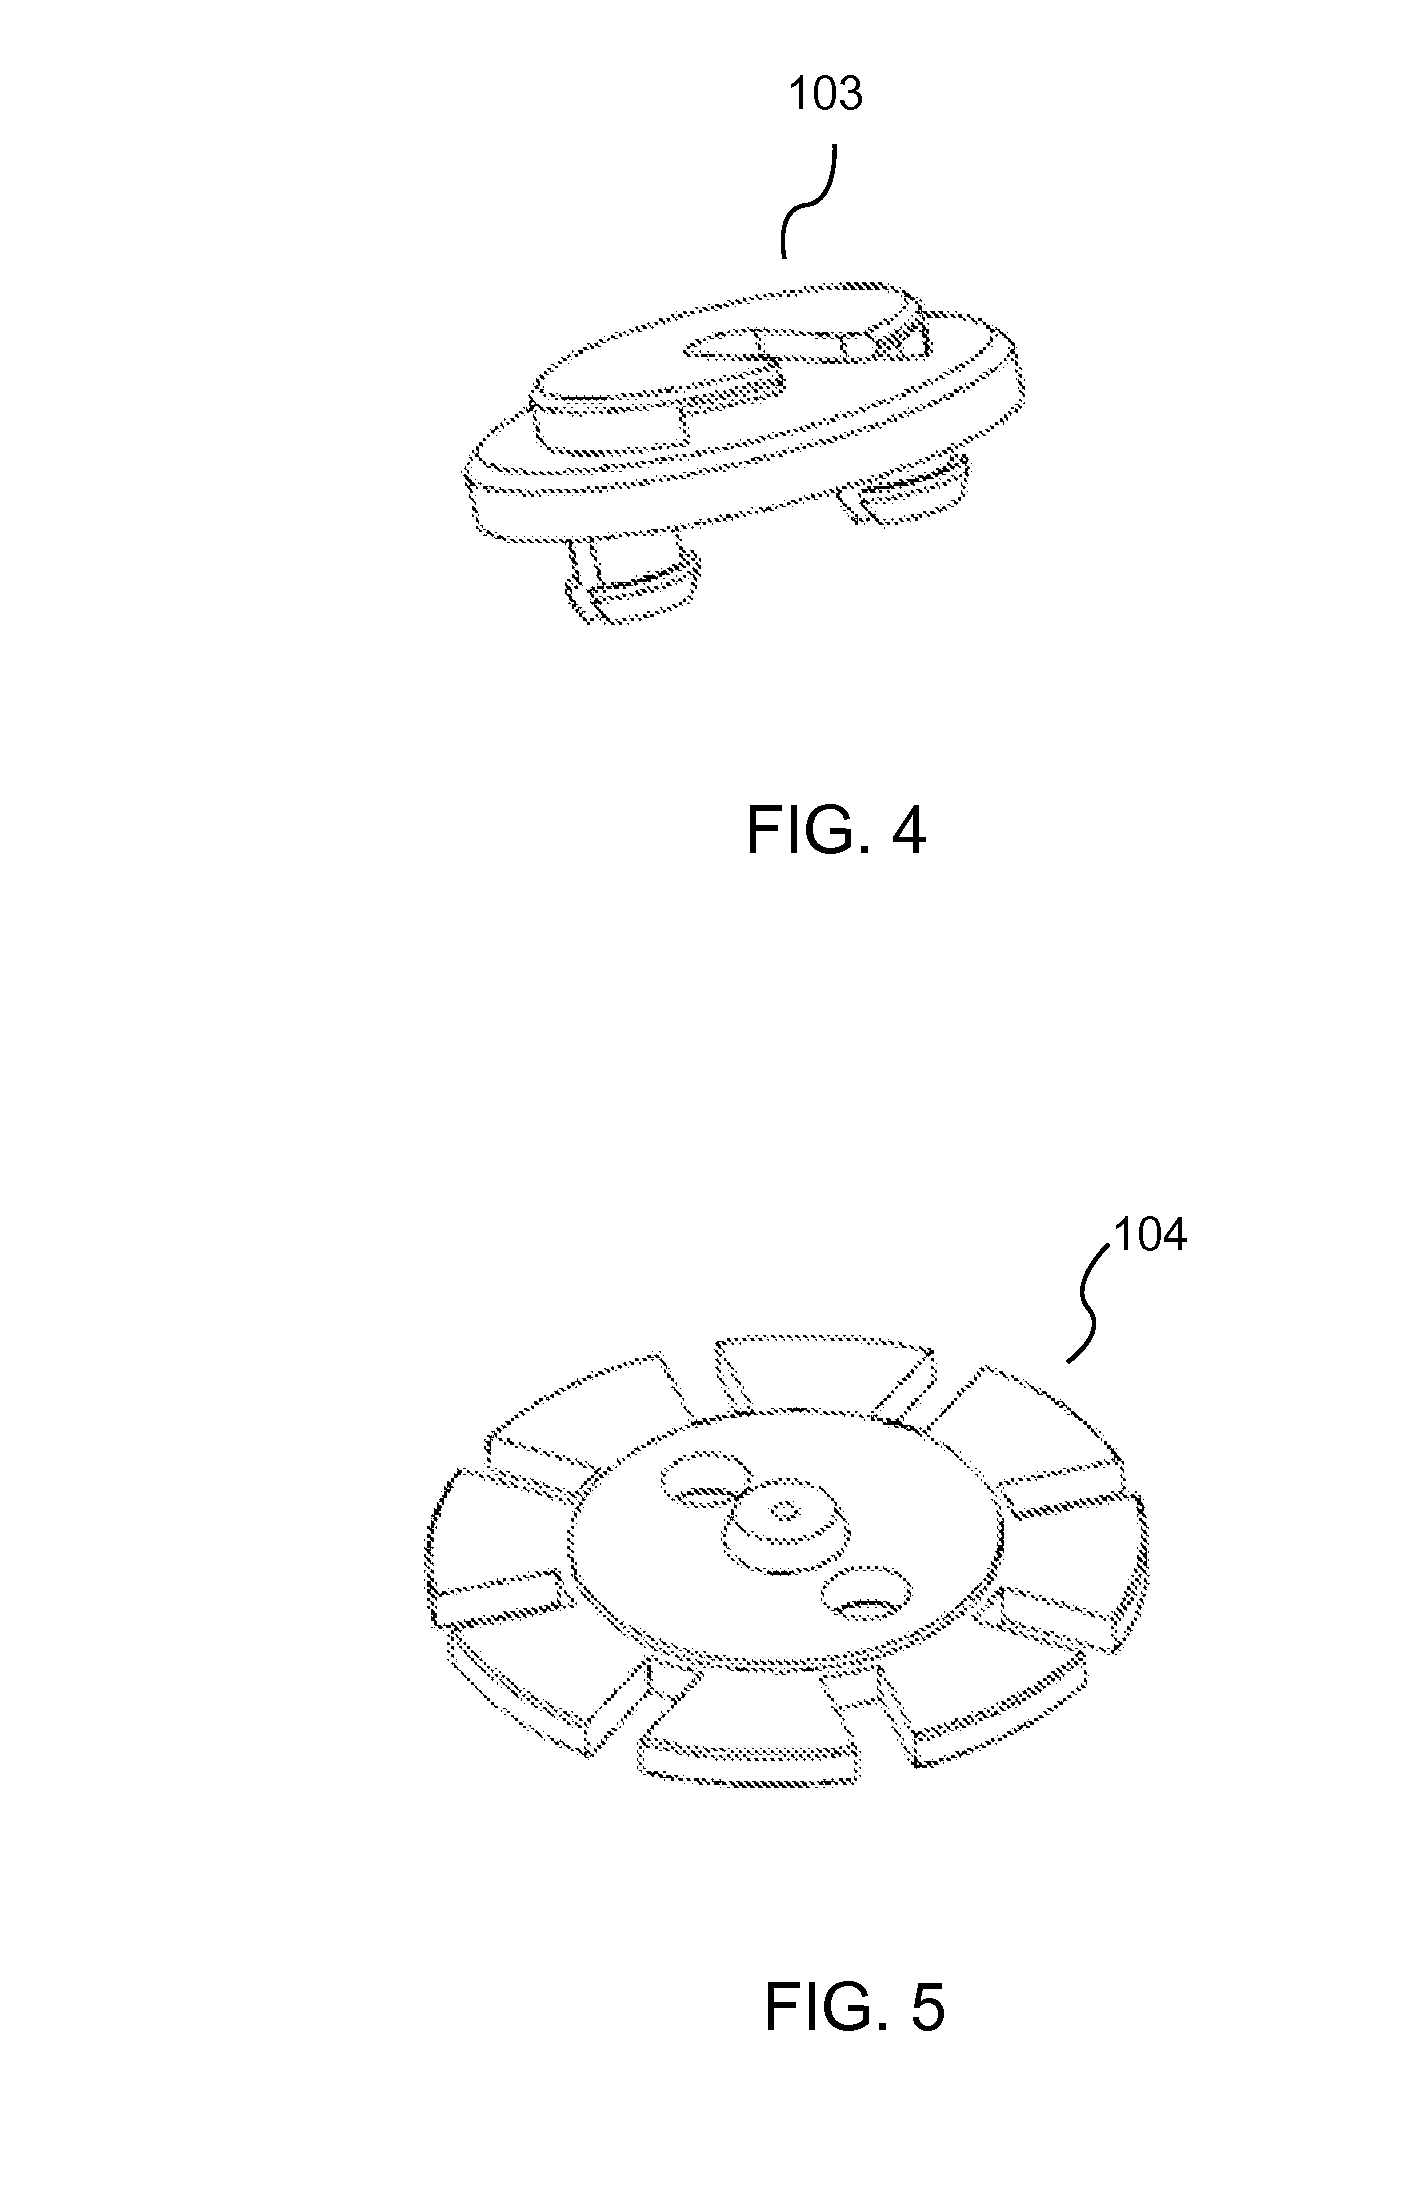 Device and Method for Performing Blood Thromboelastographic Assays by Magnetic Sensing